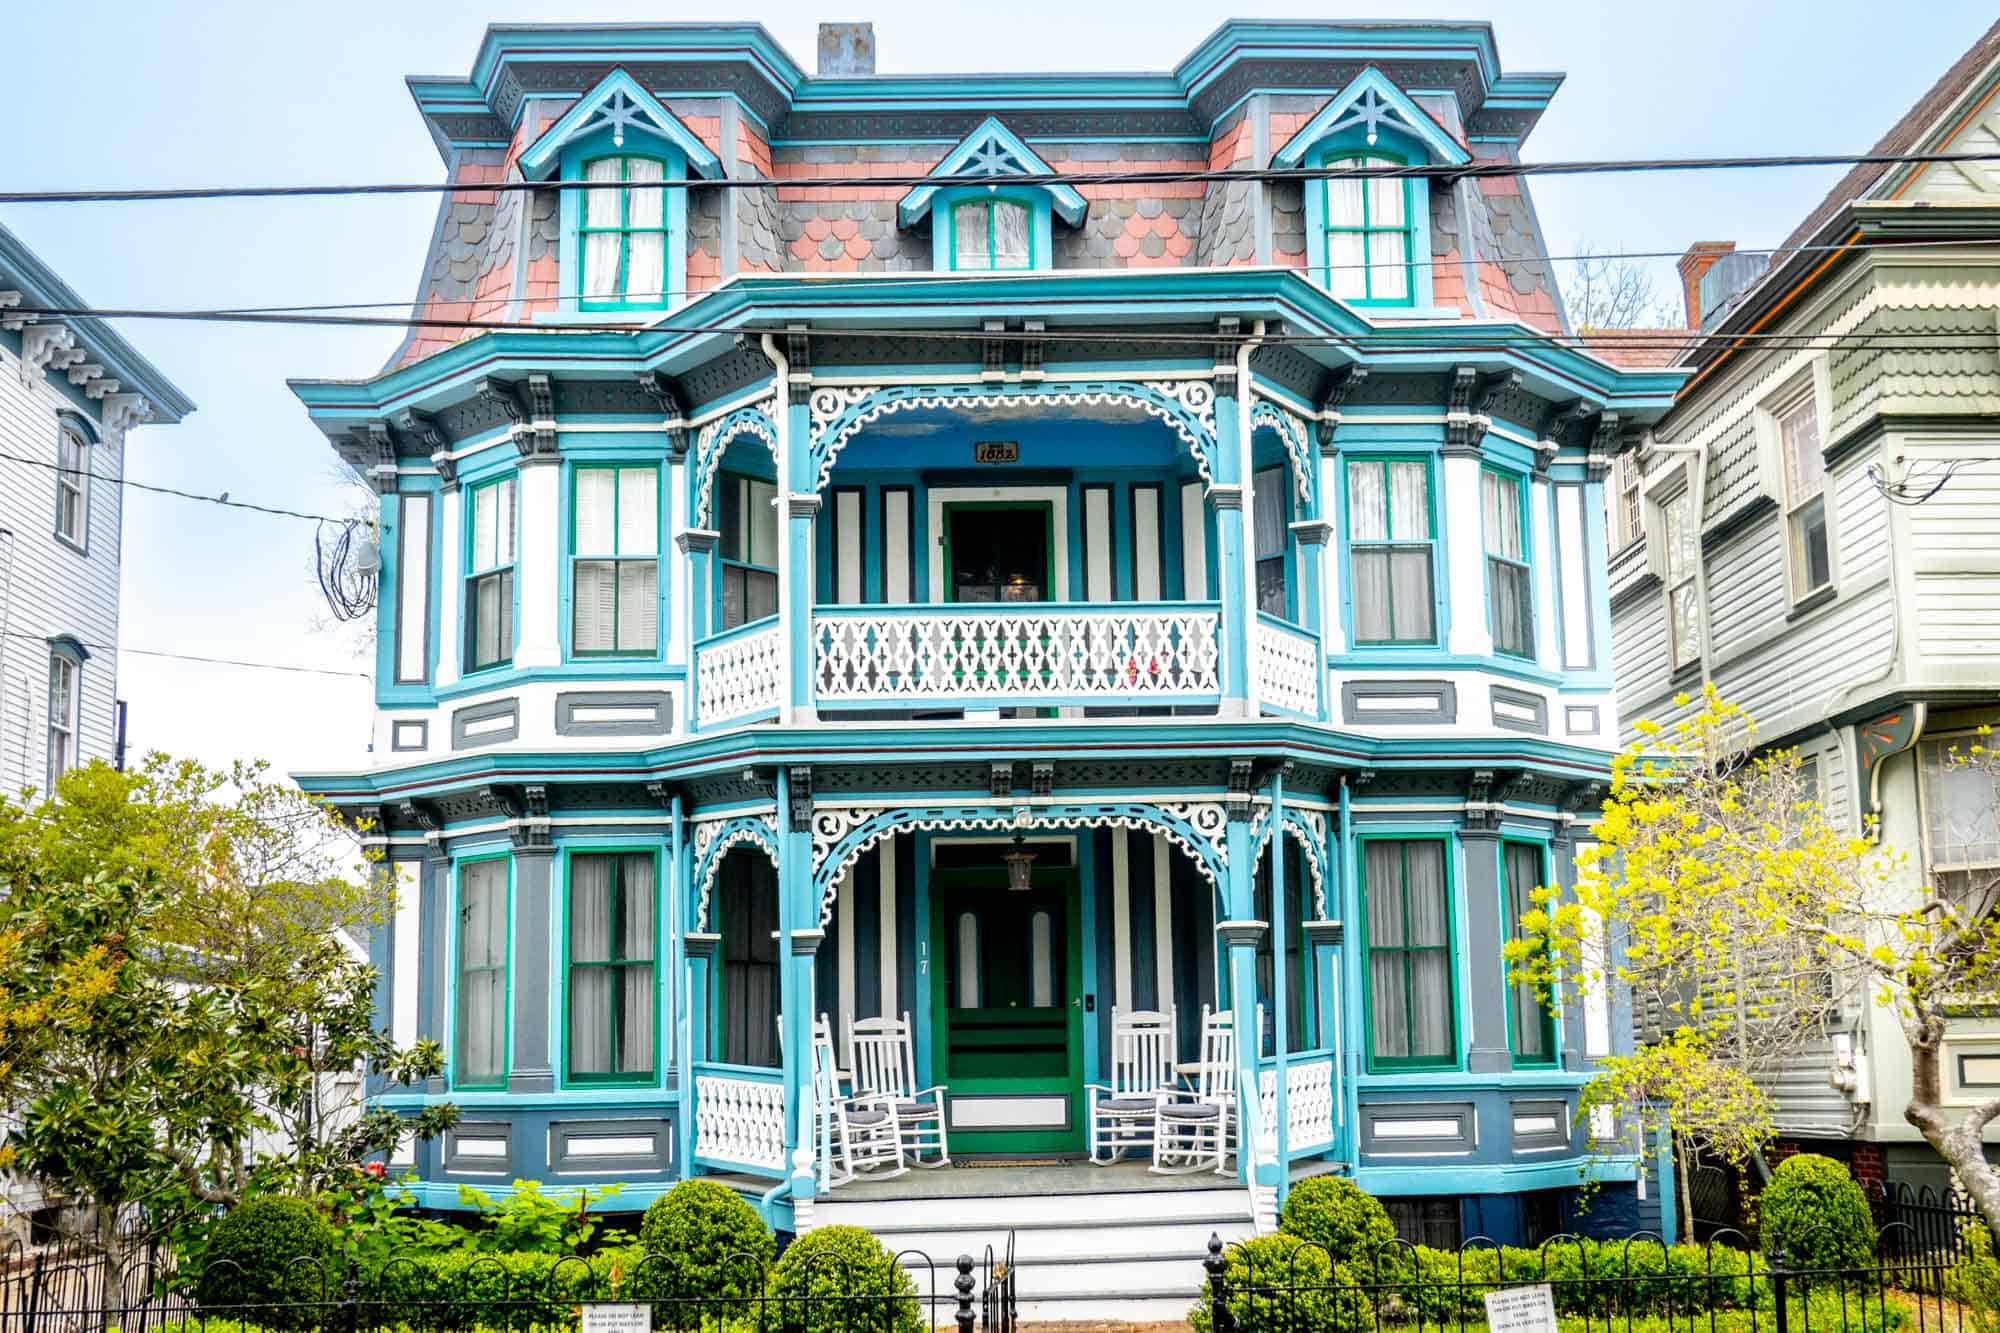 Three-story Victorian home painted blue, white, and turquoise